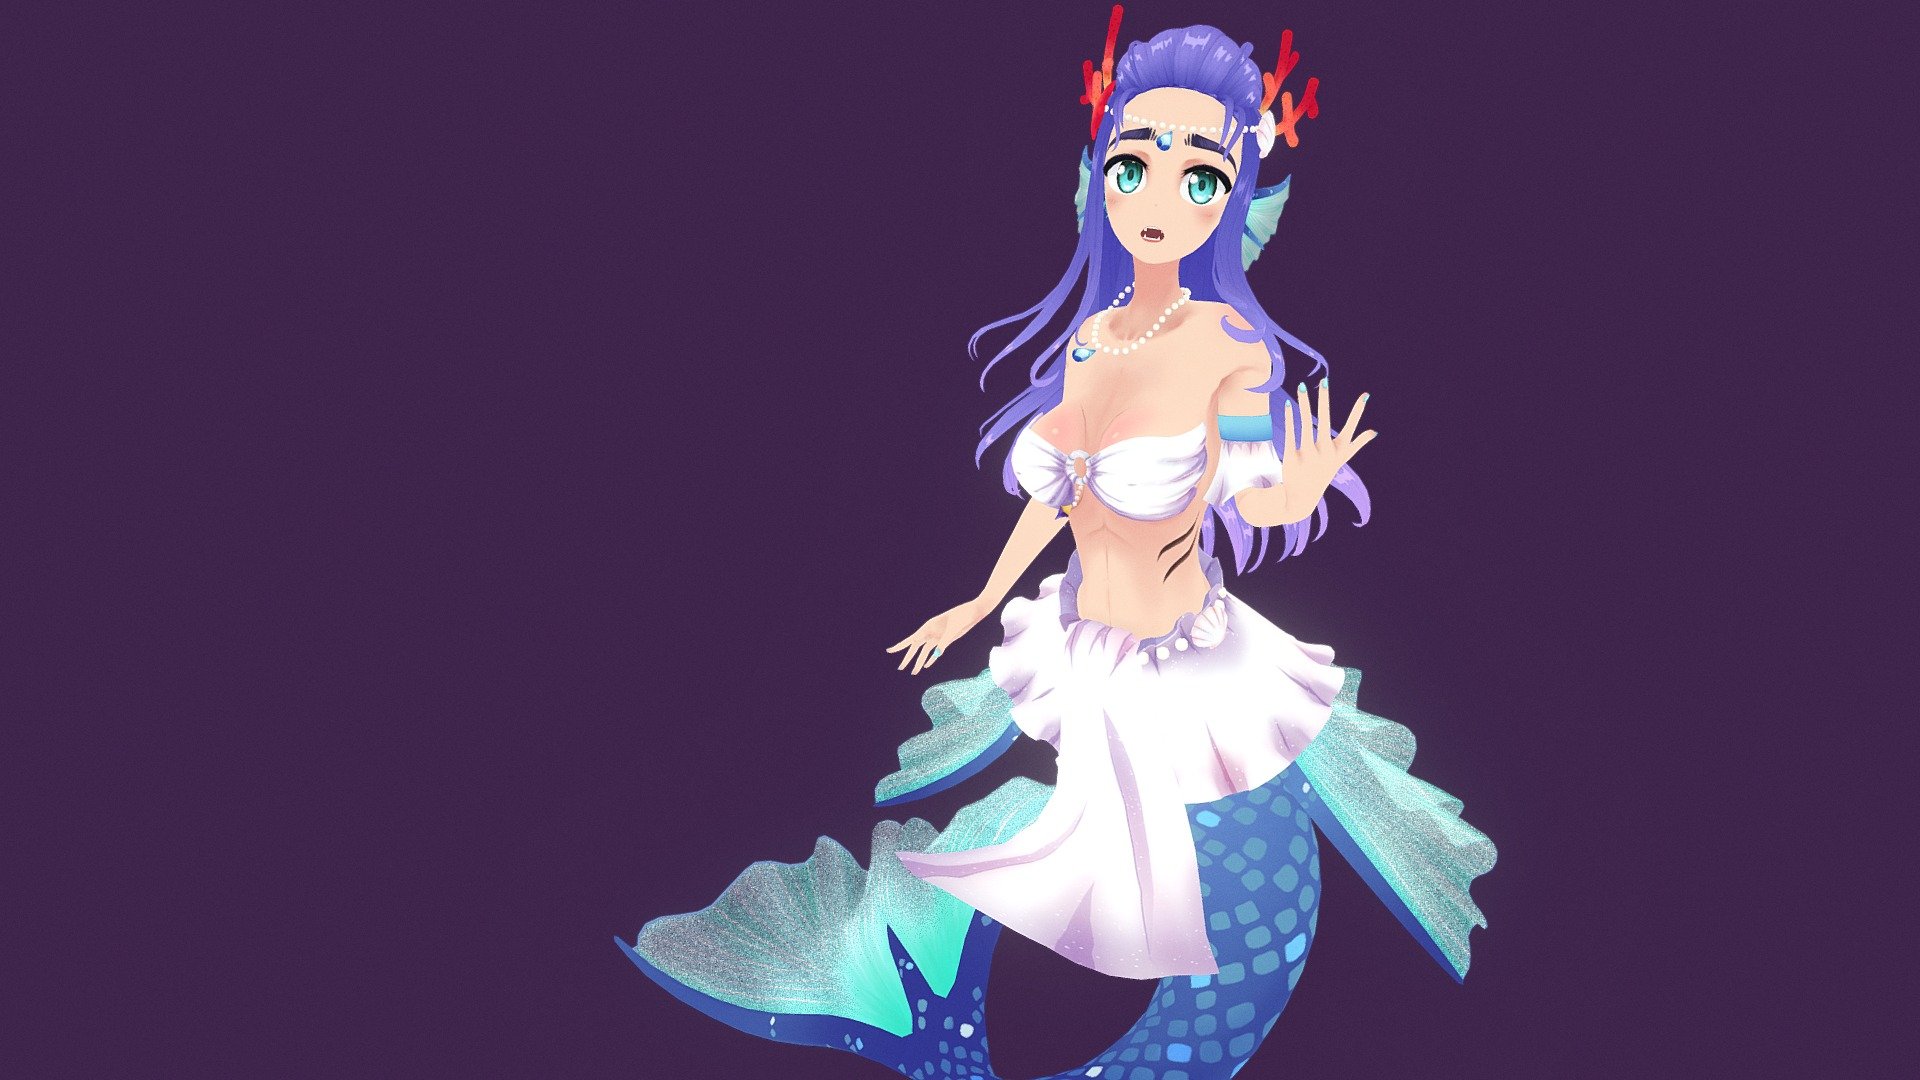 A fully rigged monster girl mermaid character for Blender

Rig Demo: https://youtu.be/7neMh9yTu5M

Features:




Fully rigged with IK FK switch

Simple Facial expression

4K cel-shading &amp; handpainted art style texture

Full body with clothes, full nude texture

Subdivision ready

Lowpoly count:




Mermaid Body - Tris: 19,588, Faces: 9,952, Verts: 10,032

Hair - Tris: 19,476, Faces: 10,016, Verts: 10,173

Cloth - Tris: 21,858, Faces: 12,099, Verts: 11,164

Note: no animation include inside this character

Create your own character: Customize Female Base Mesh-Anime Style - Monster Girl Mermaid - Buy Royalty Free 3D model by menglow 3d model